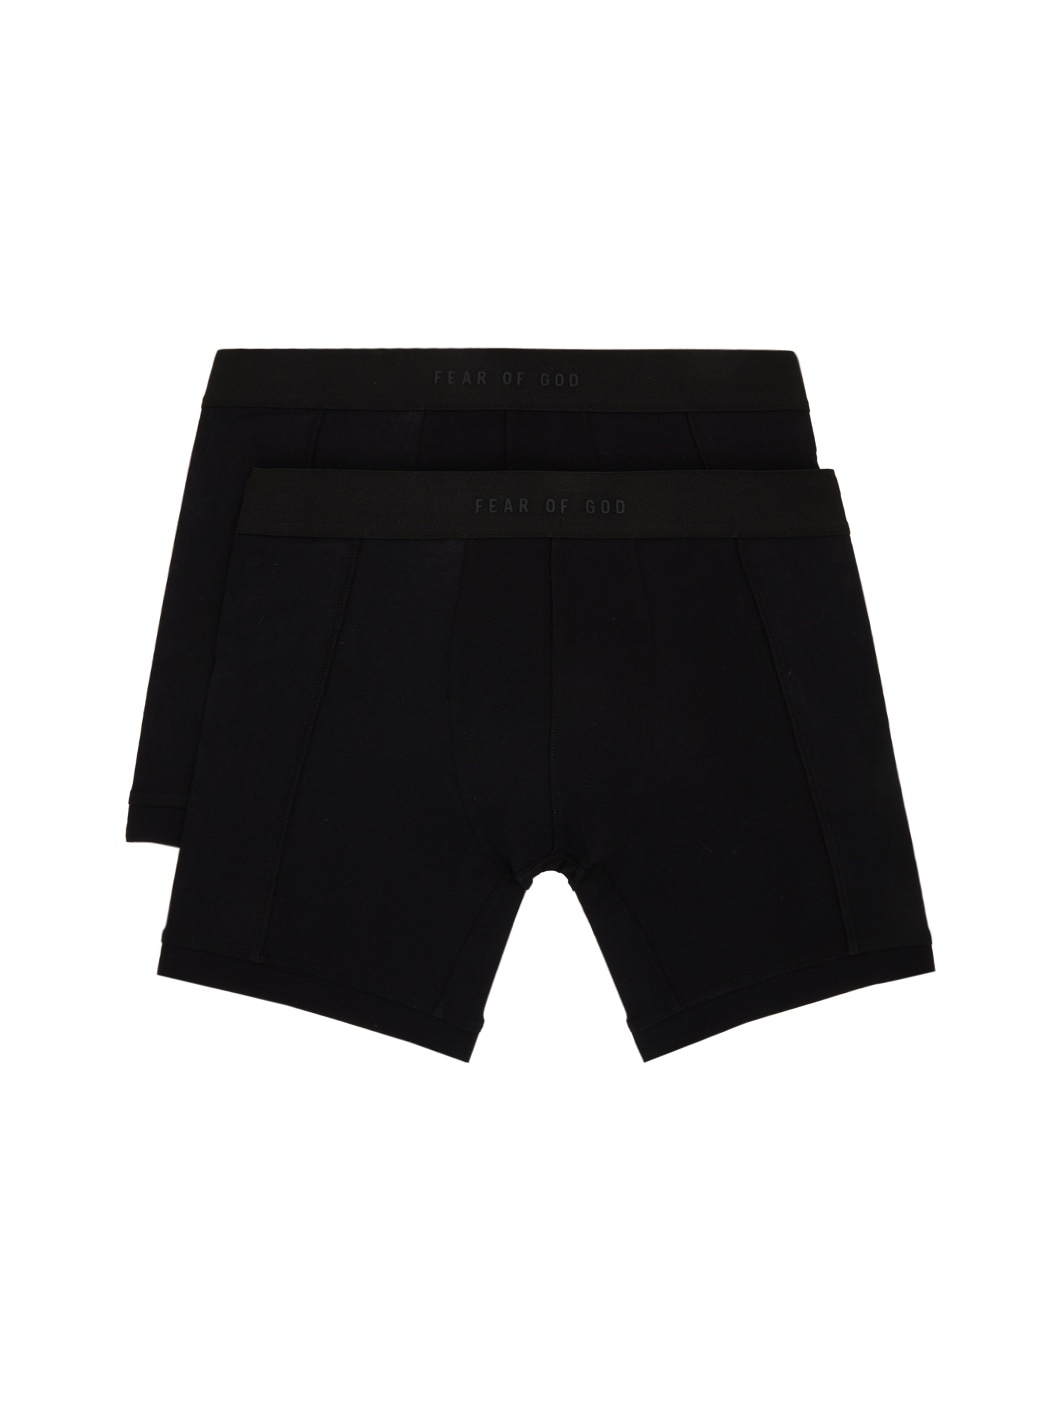 Two-Pack Black Boxer Briefs - 1